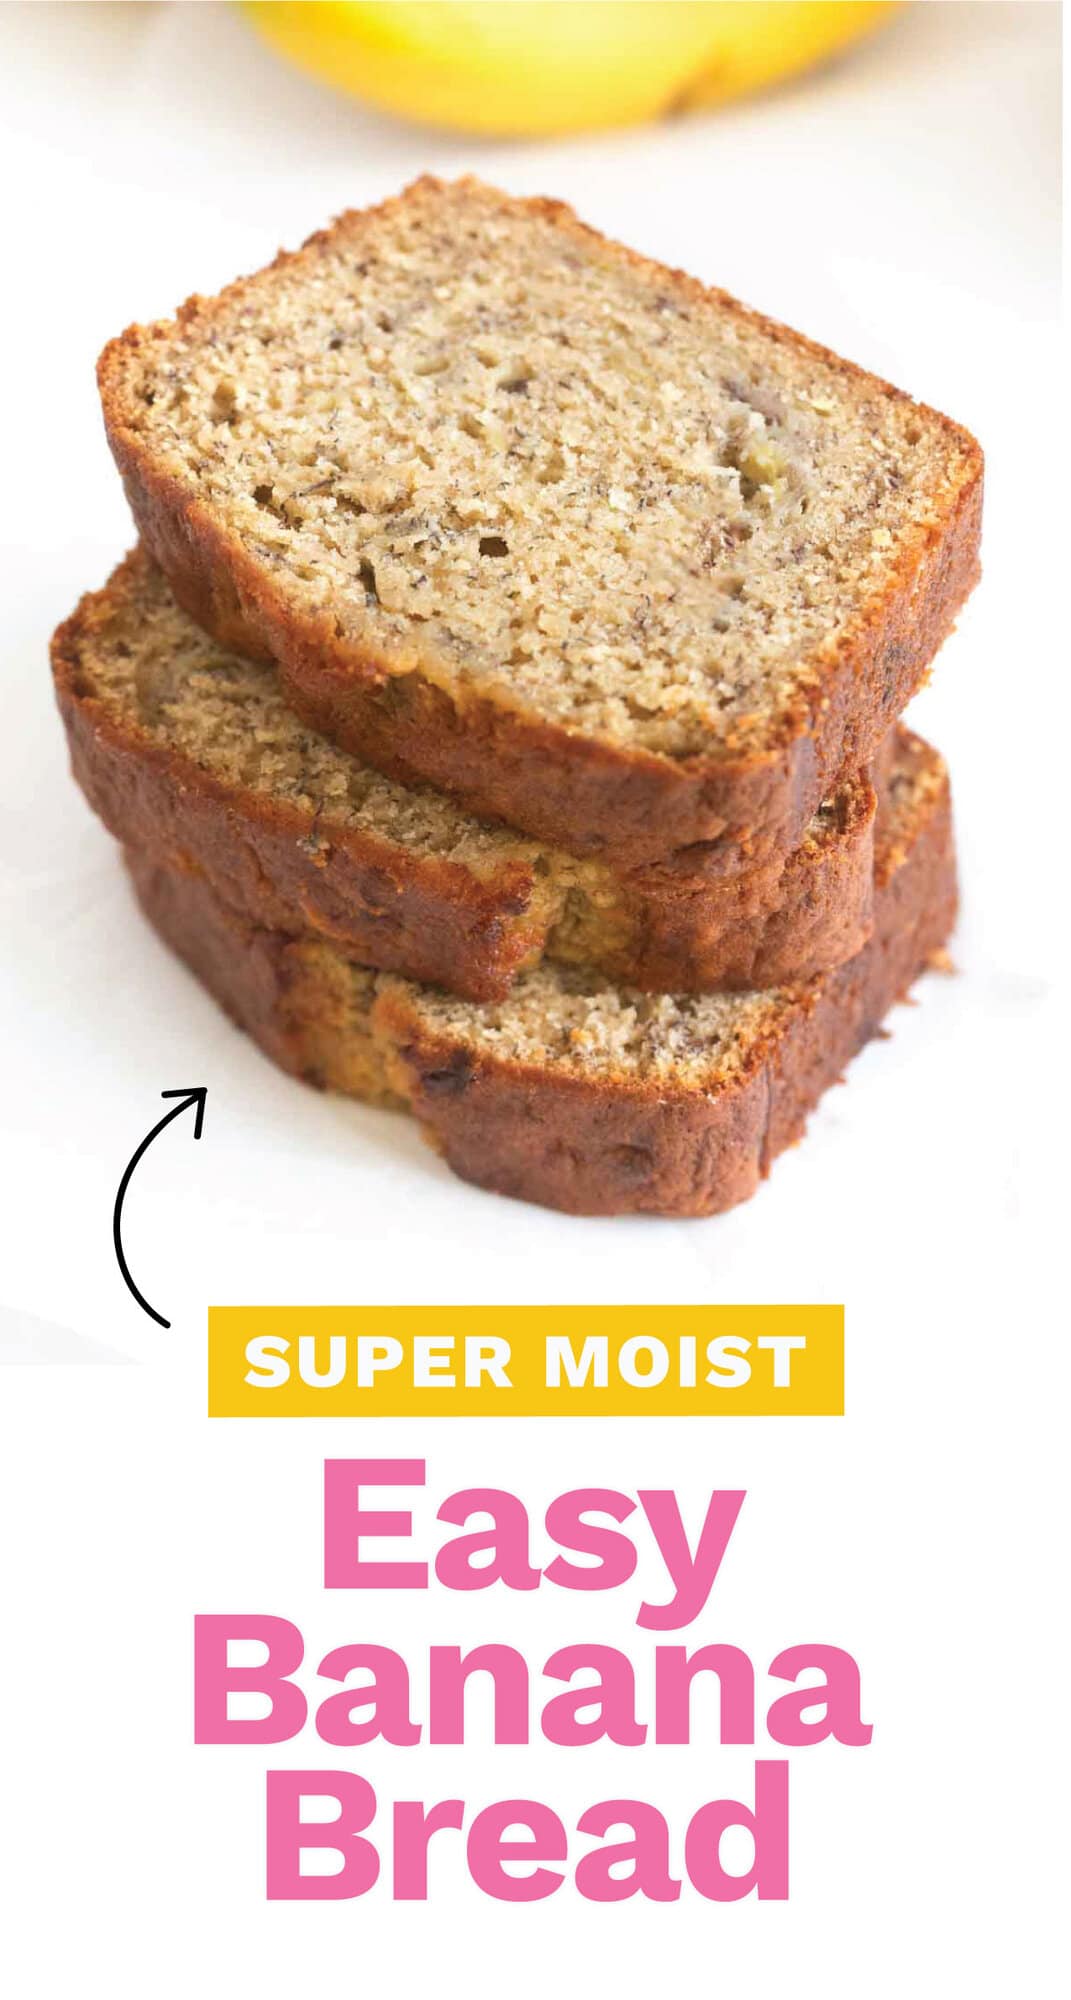 The Ultimate Moist Banana Bread (with step-by-step photos!)